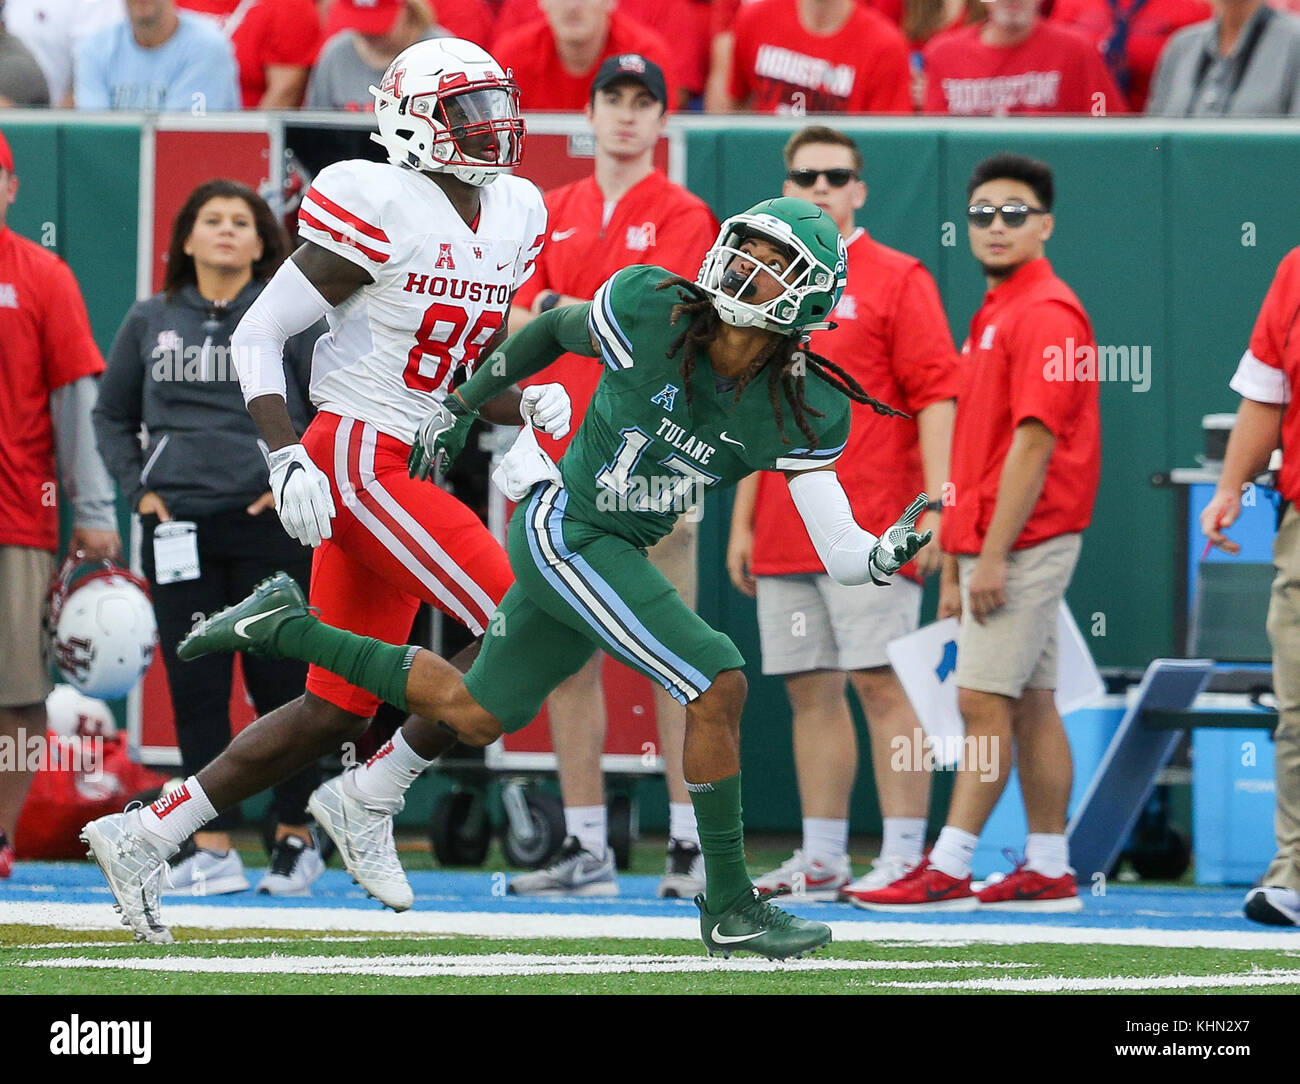 New Orleans, LA, USA. 18th Nov, 2017. Tulane CB Parry Nickerson #17 looks back at the ball during the NCAA football game between the Tulane Green Wave and the Houston Cougars at Yulman Stadium in New Orleans, LA. Kyle Okita/CSM/Alamy Live News Stock Photo